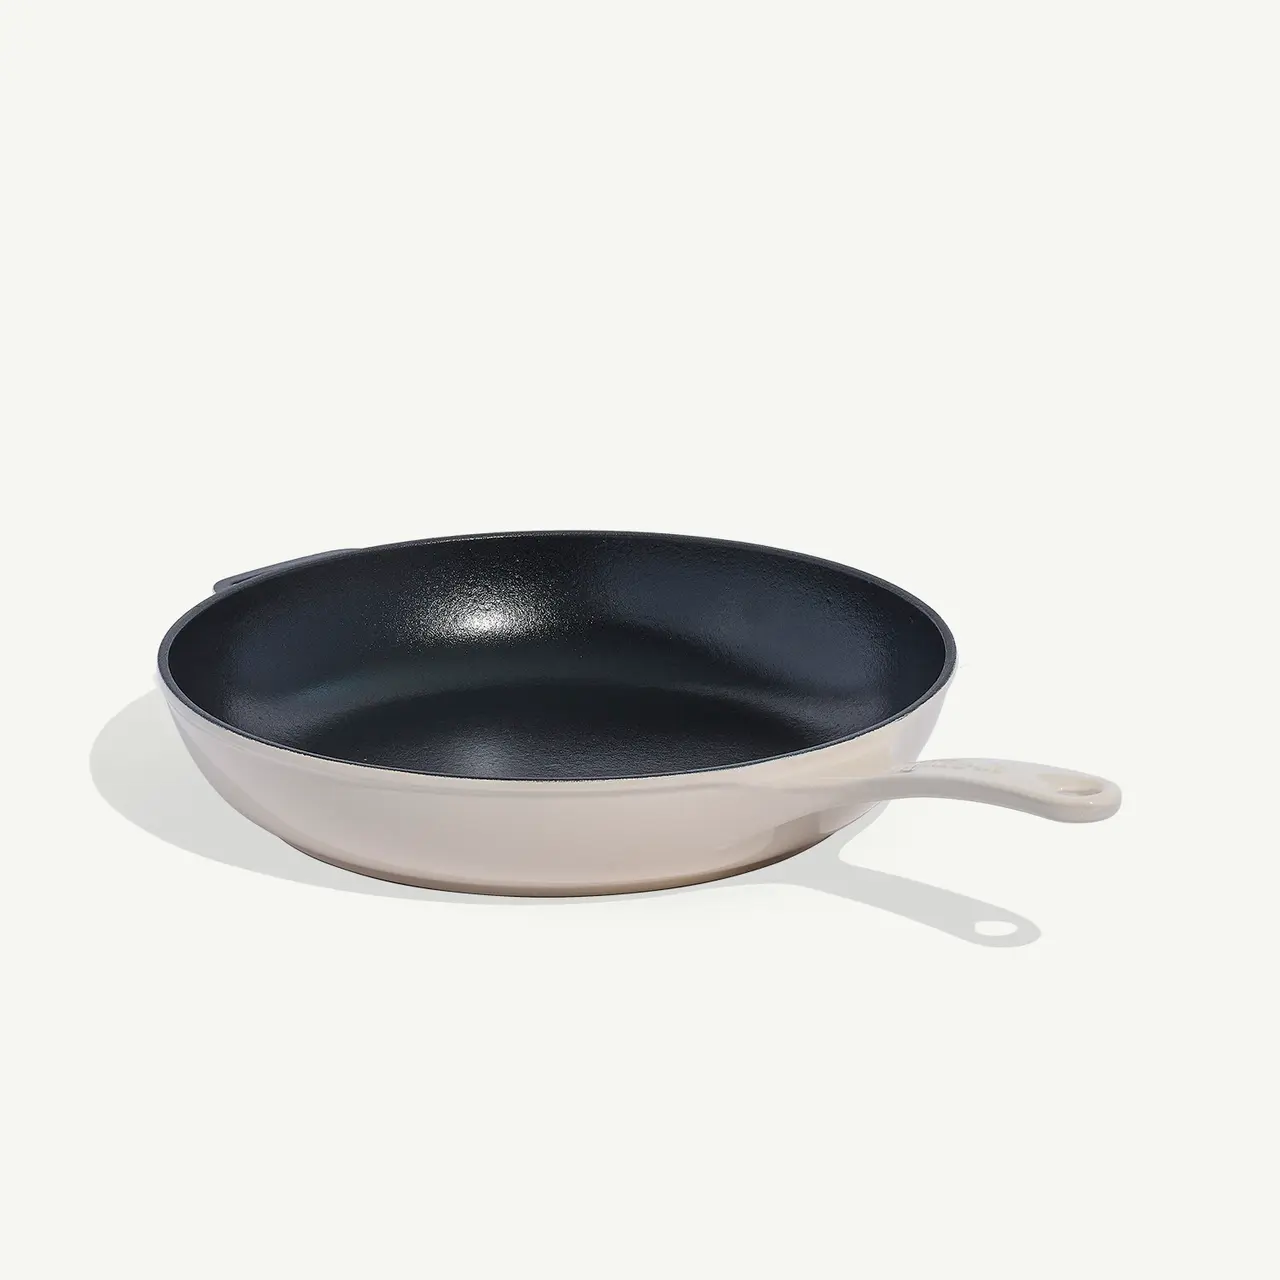 A non-stick frying pan with a beige handle on a plain background.